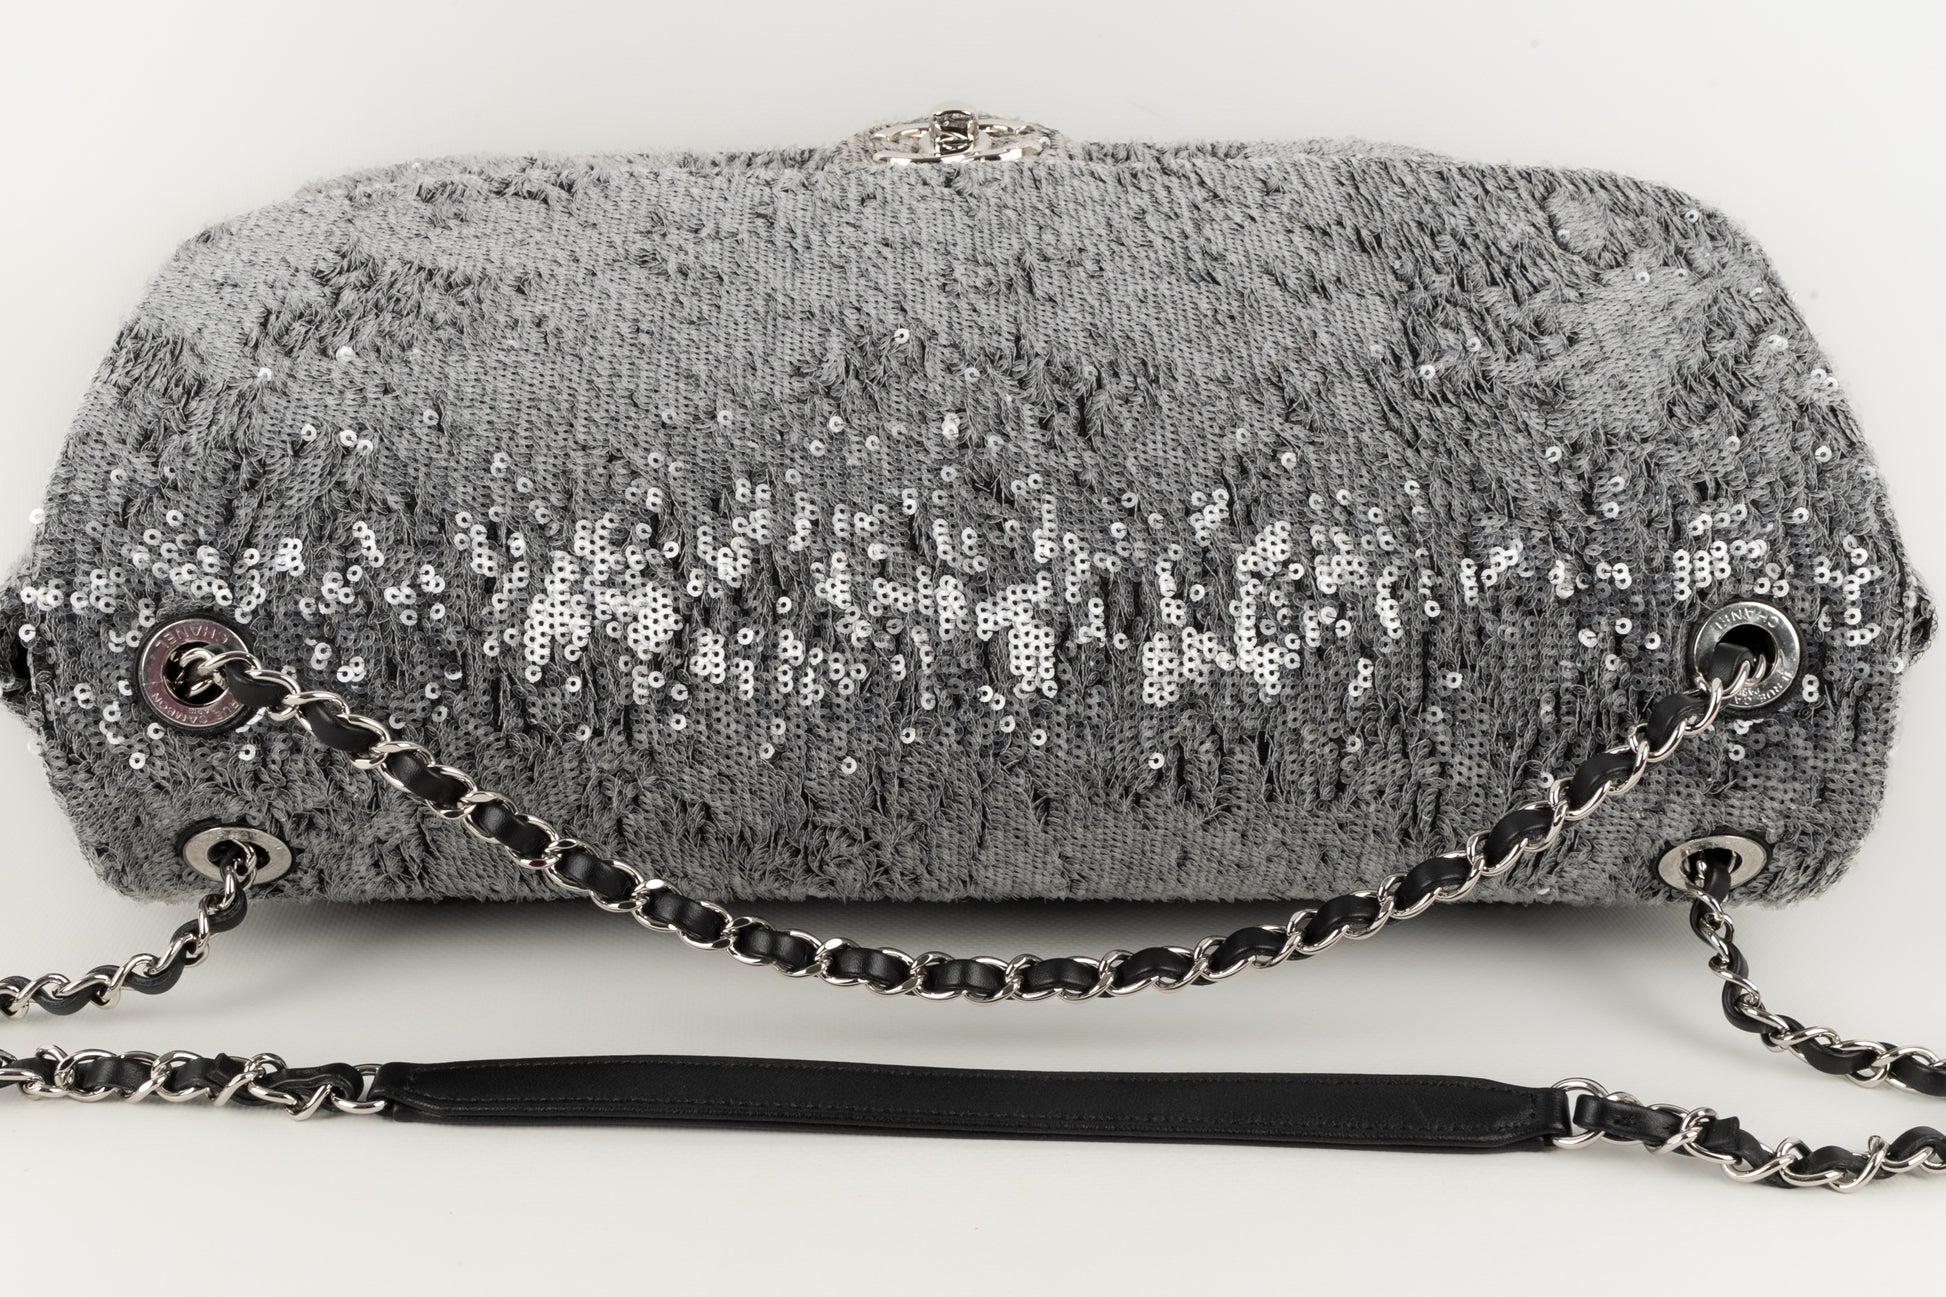 Chanel Timeless Leather Bag with Grey Sequins, Maxi Jumbo For Sale 1